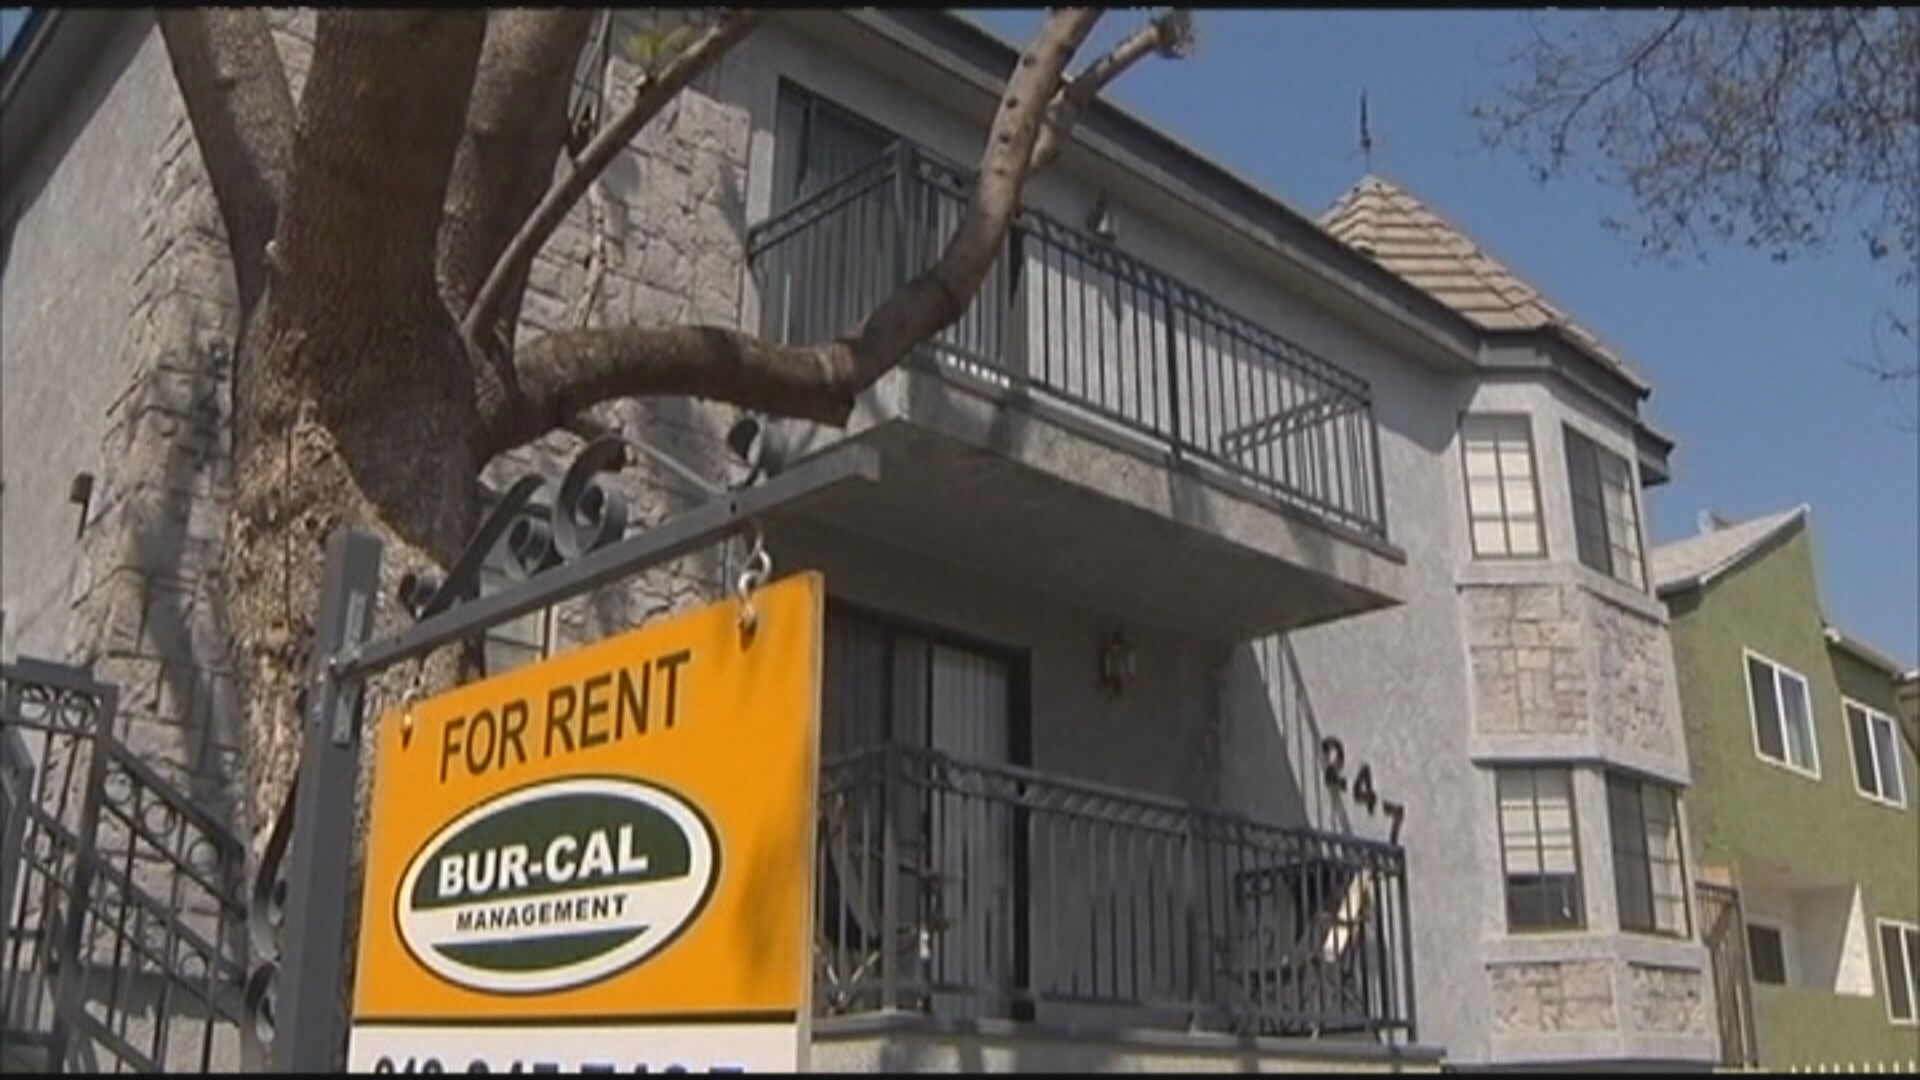 The Sacramento City Council will decide whether to approve the Tenant Protection and Relief Act at Tuesday's meeting.